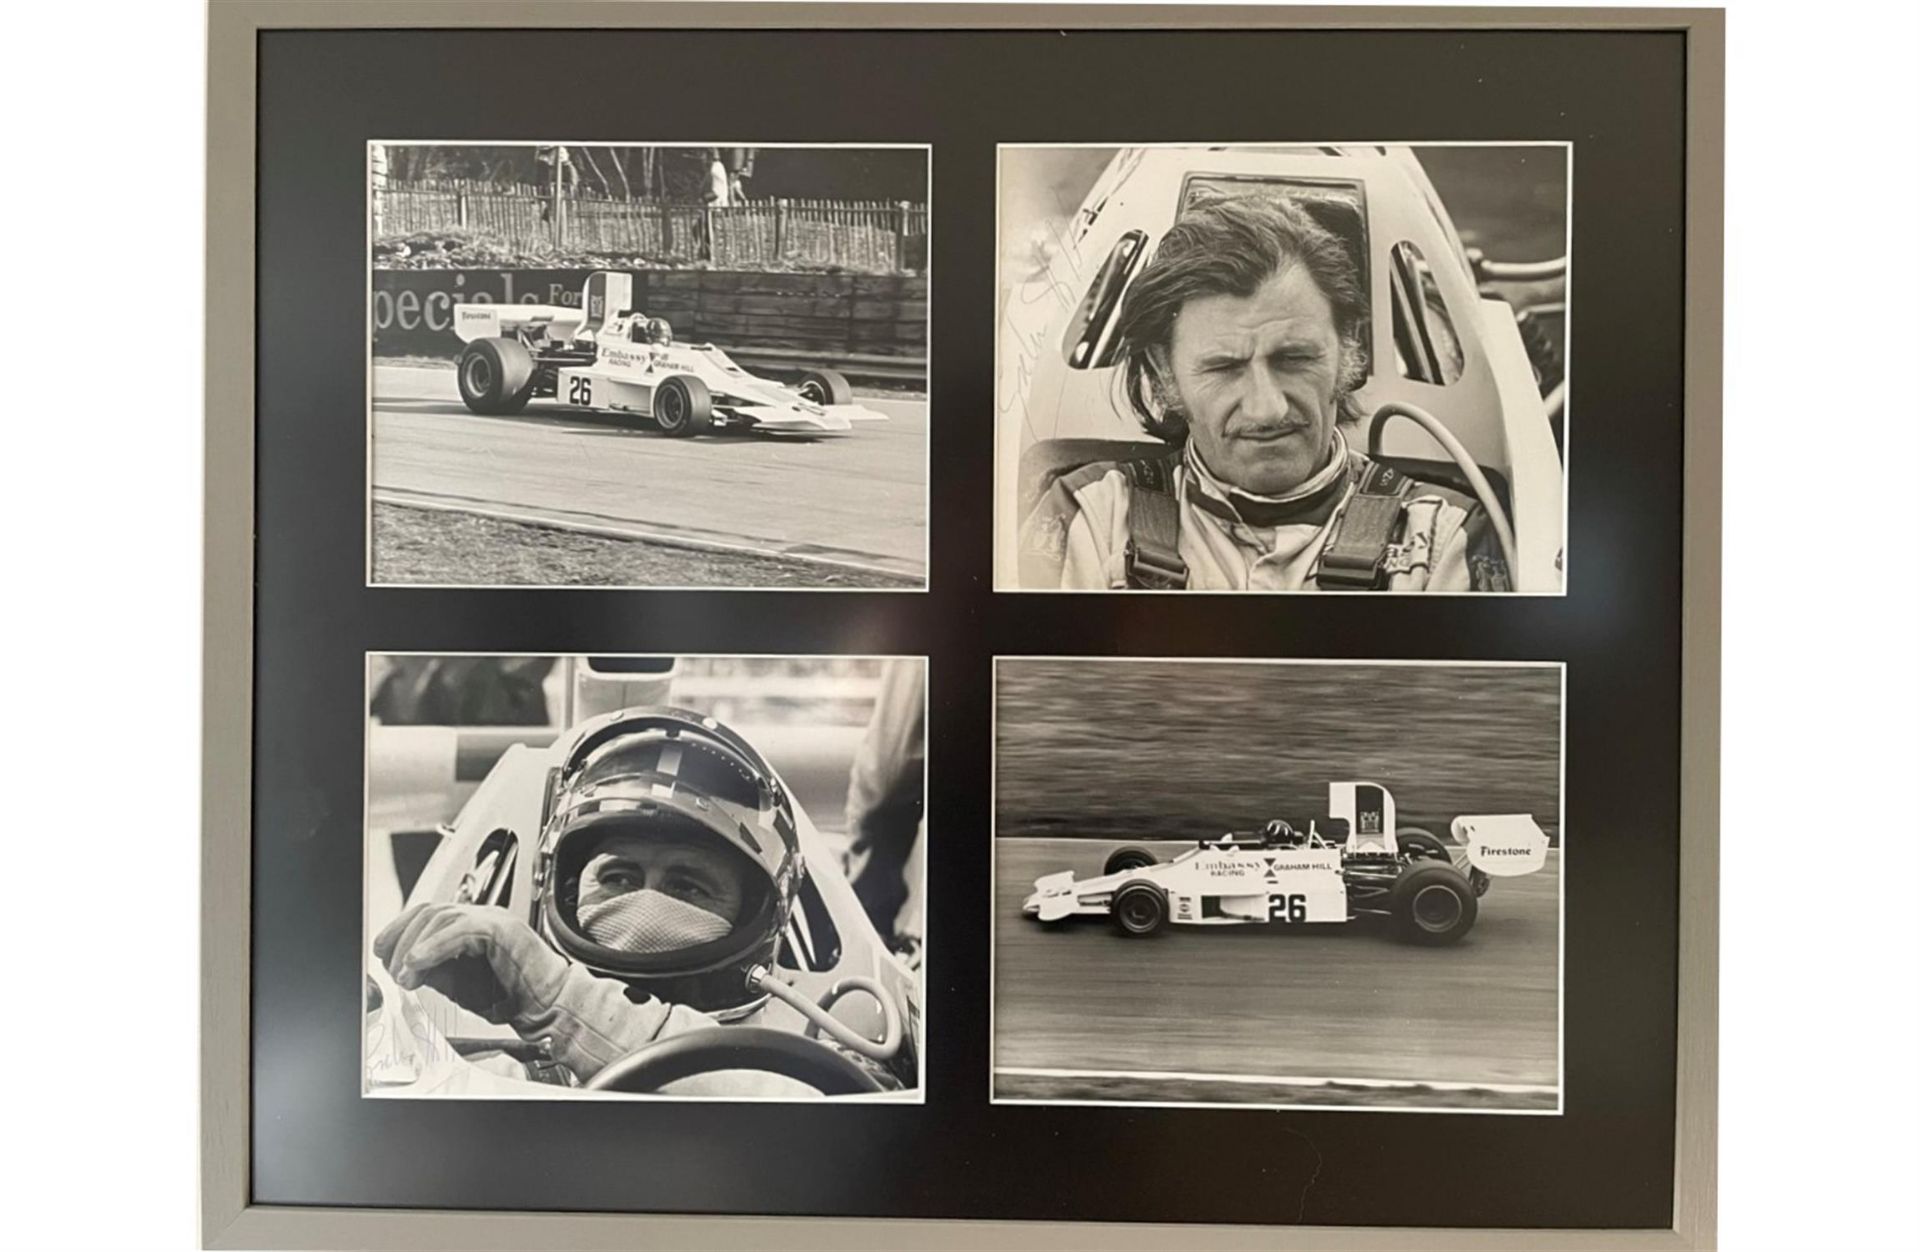 Four Original Photographic Prints of Graham Hill from the 1974 British Grand Prix*